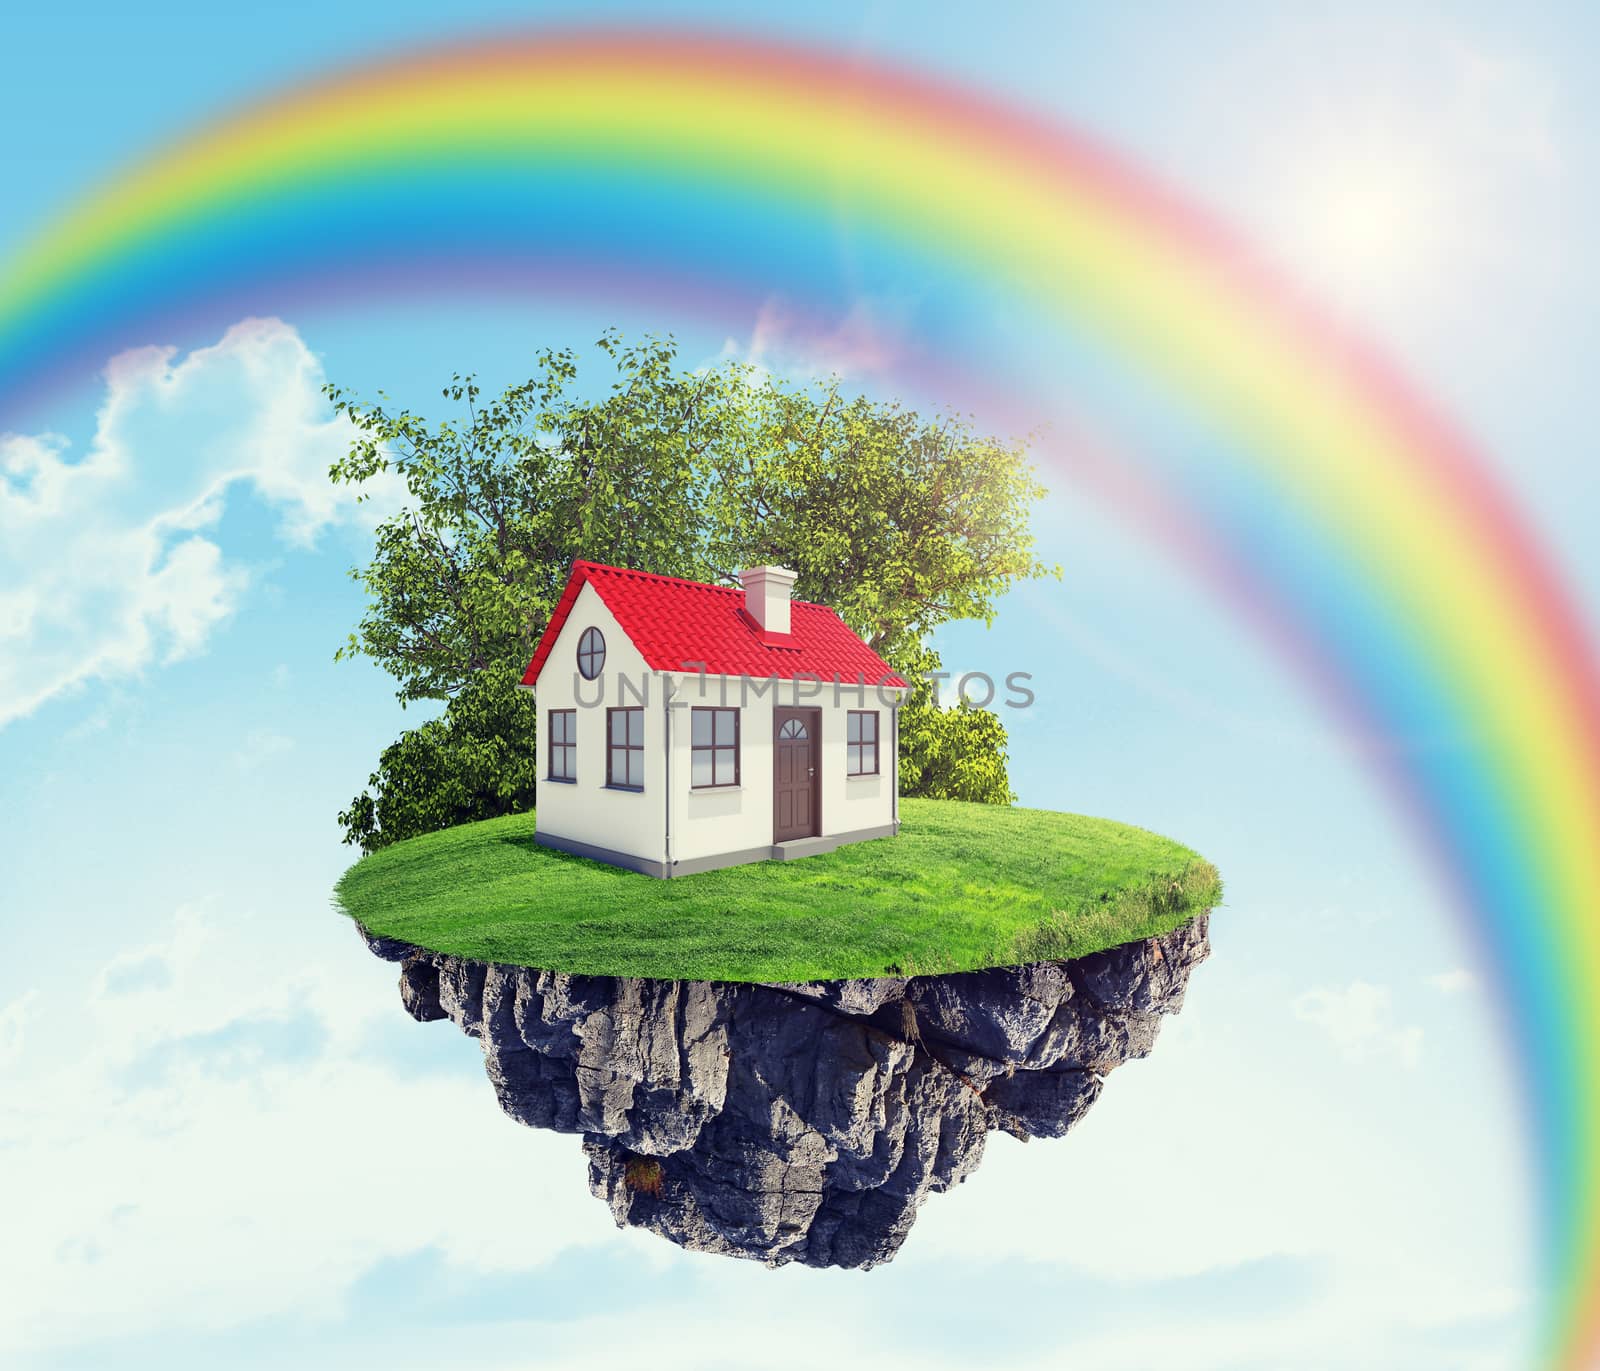 House on island with rainbow, green field and trees